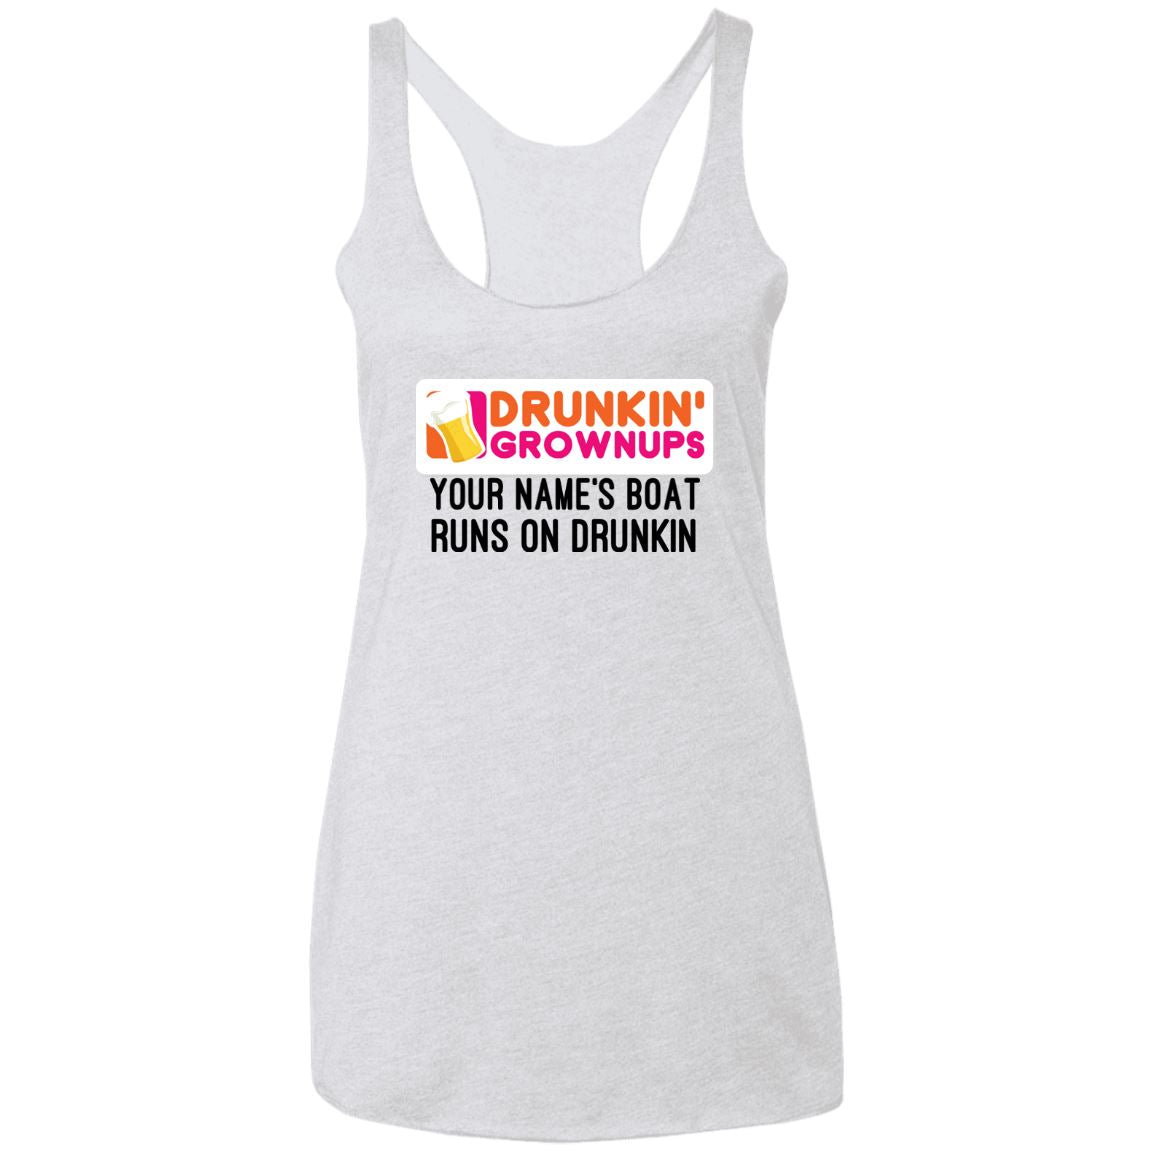 Drunkin Grownups PERSONALIZED Men's and Women's Tanks and Tee's Apparel NL6733 Ladies' Triblend Racerback Tank2 Heather White X-Small